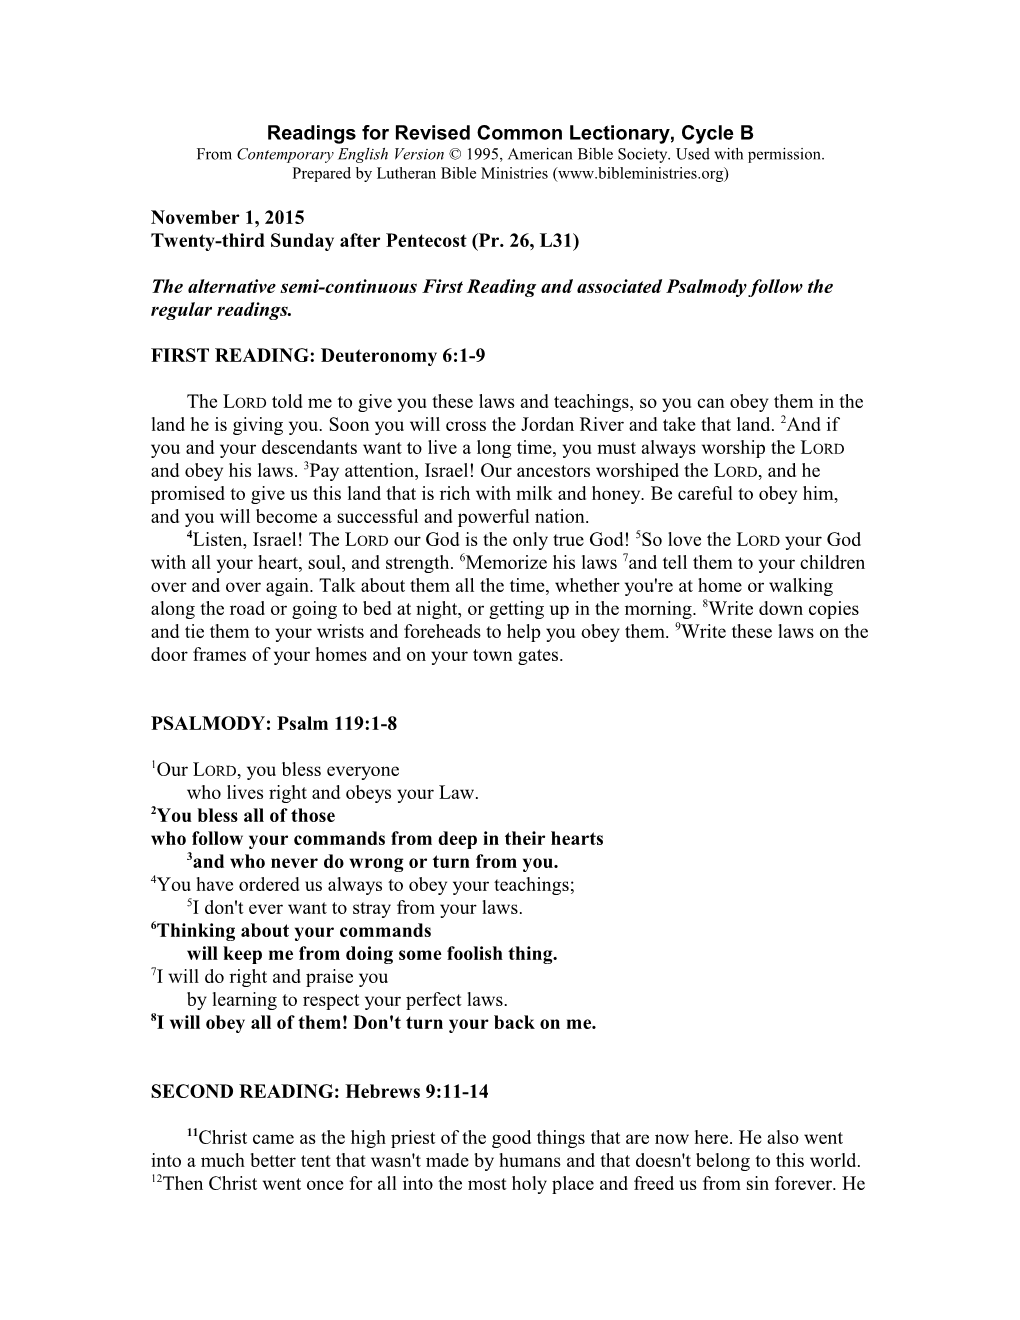 Readings for Revised Common Lectionary, Cycle A s2